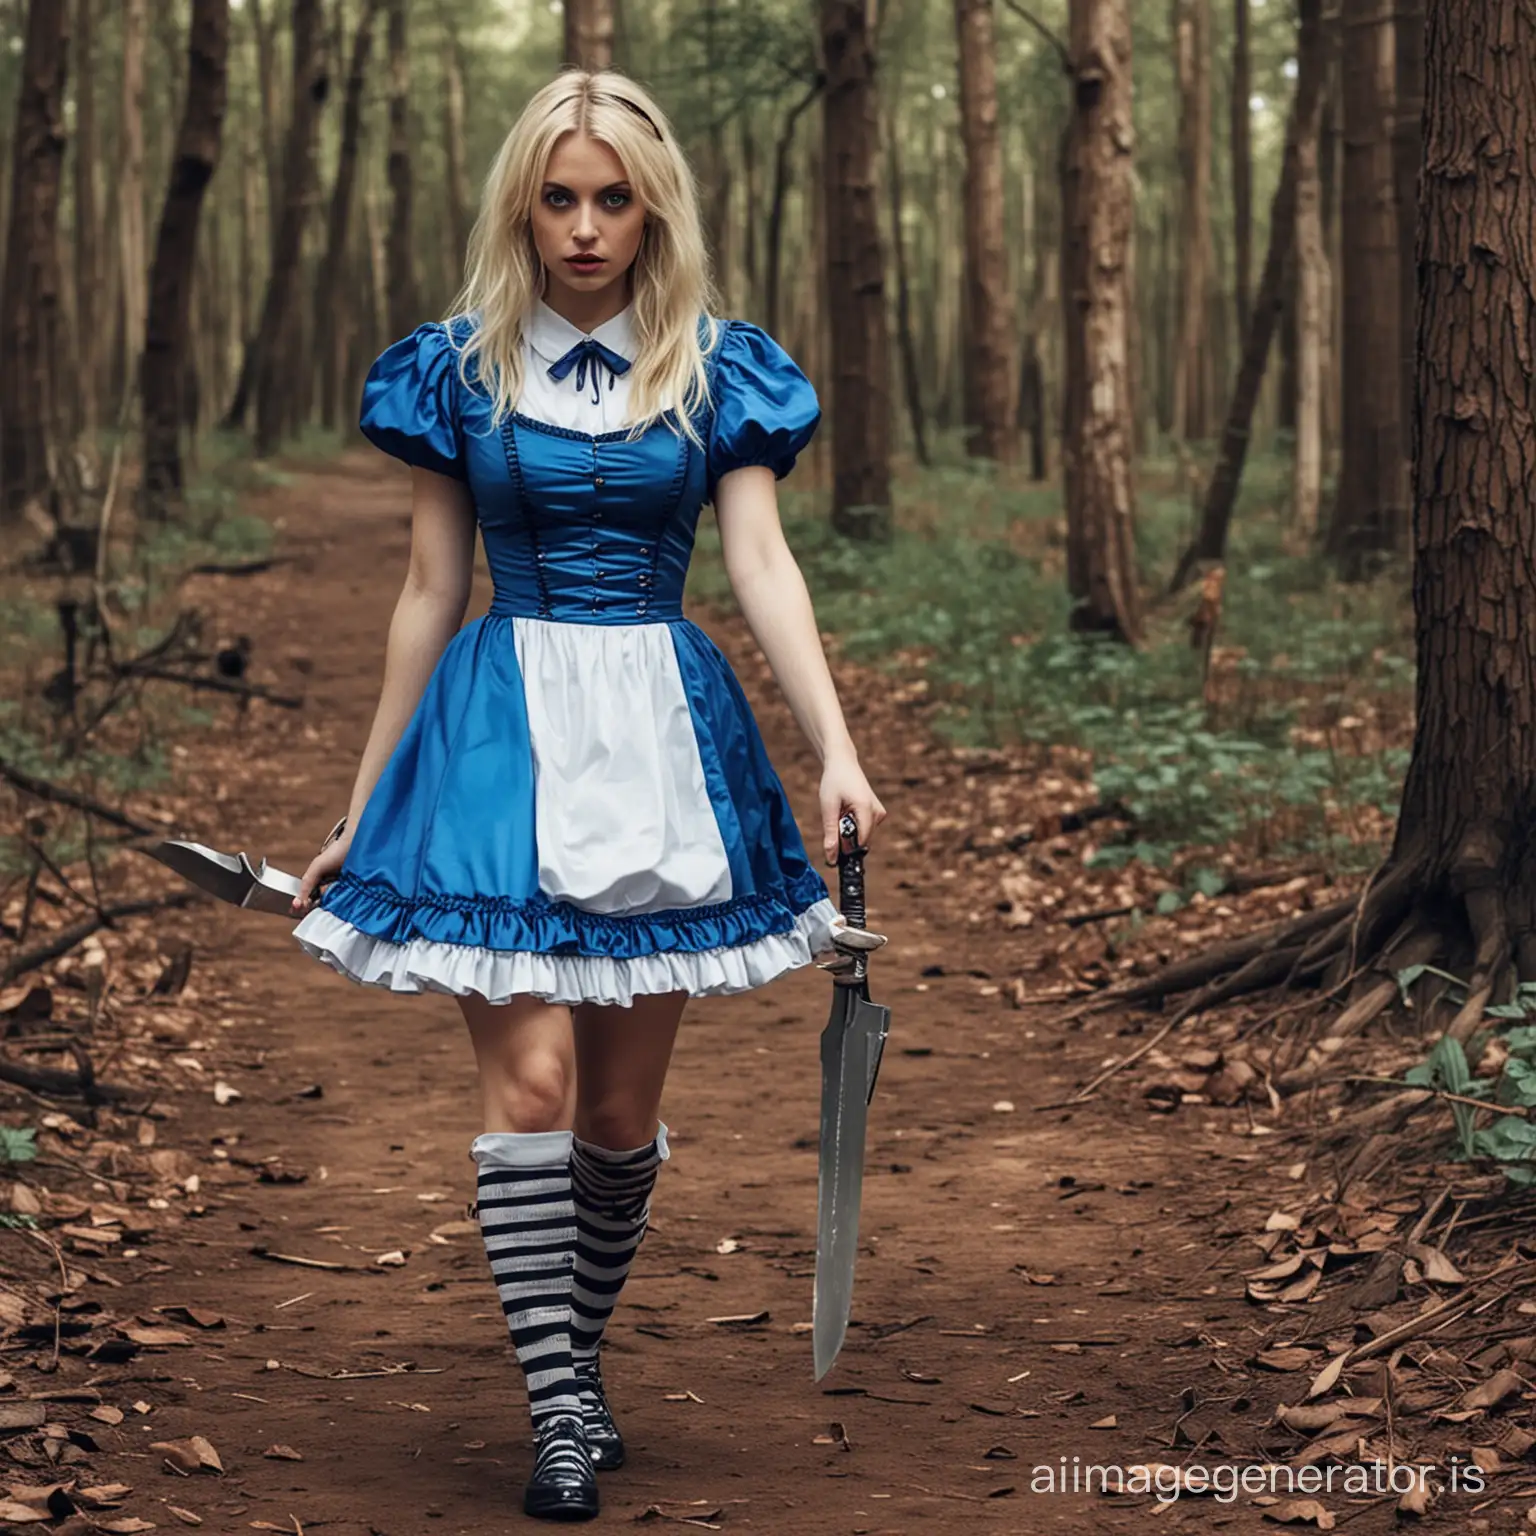 blonde alice in wonderland with with black and white striped stockings and blue dress holding a knife madness returns in forest